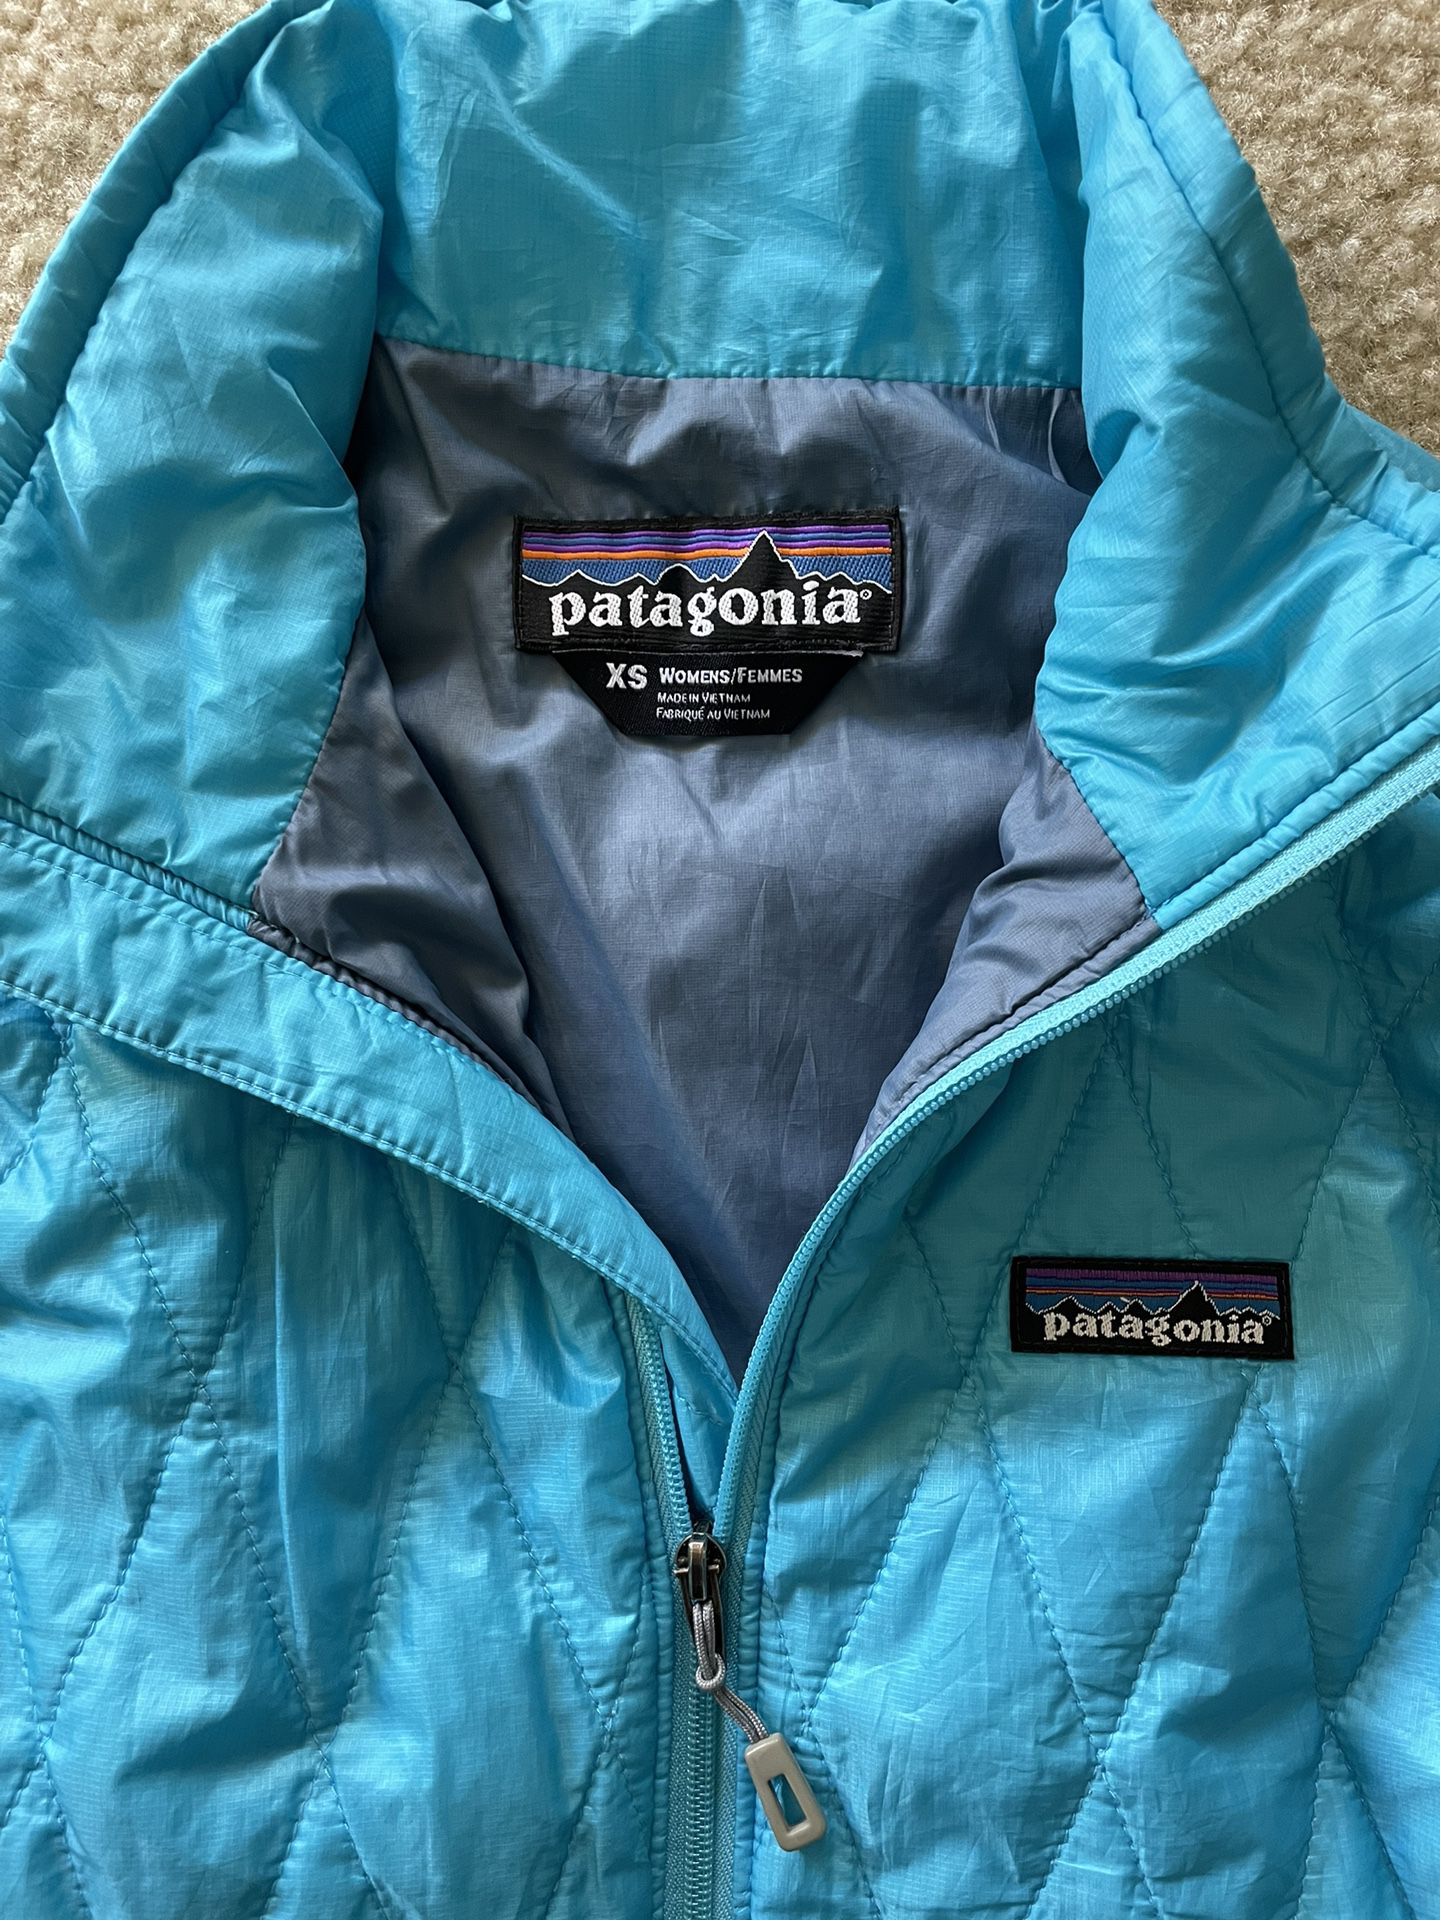 Womens Patagonia Puff Puffer Zip Vest Jacket Teal Blue Size XS